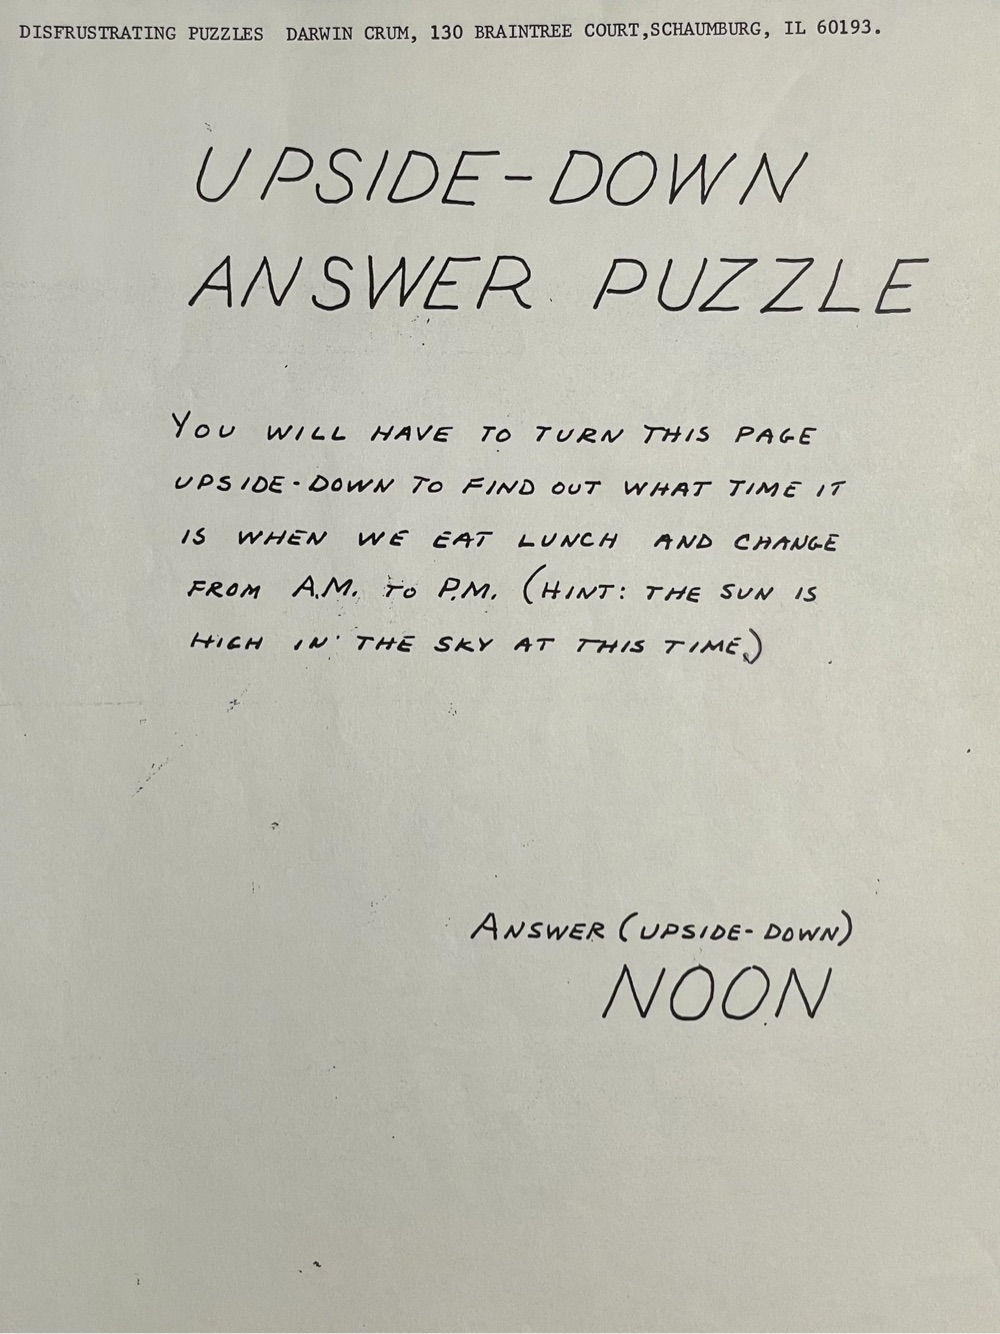 an easy upside-down answer puzzle